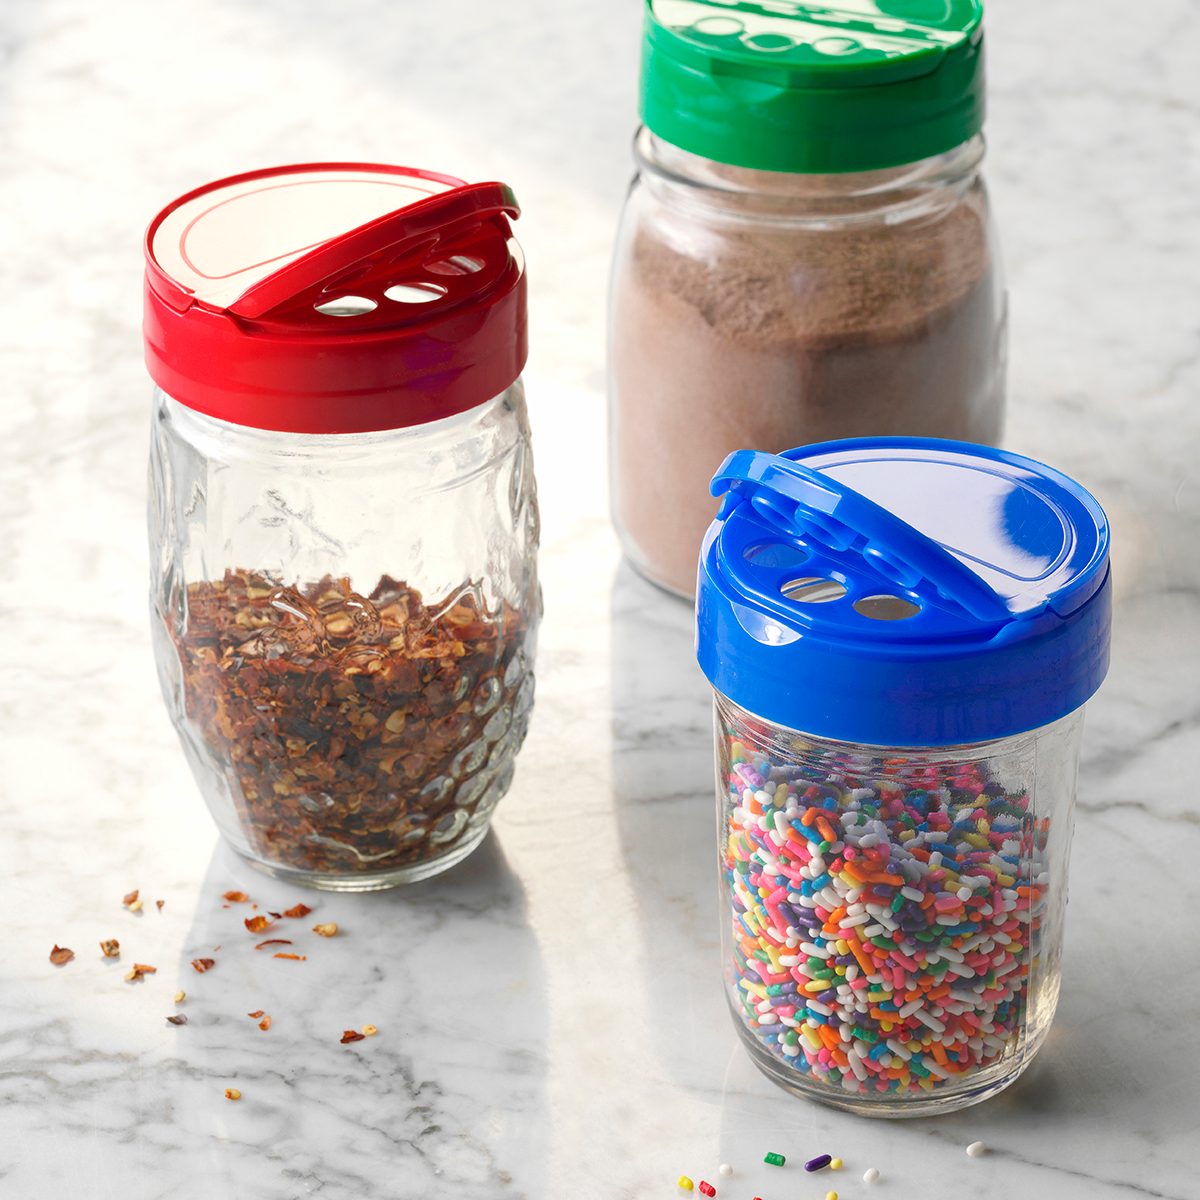 Glass Spice Jars With Shaker Lids Spice Containers 16 Oz Seasoning Shaker  for Parmesan Cheese, Cinnamon Sugar Dispenser or Salt Shaker 